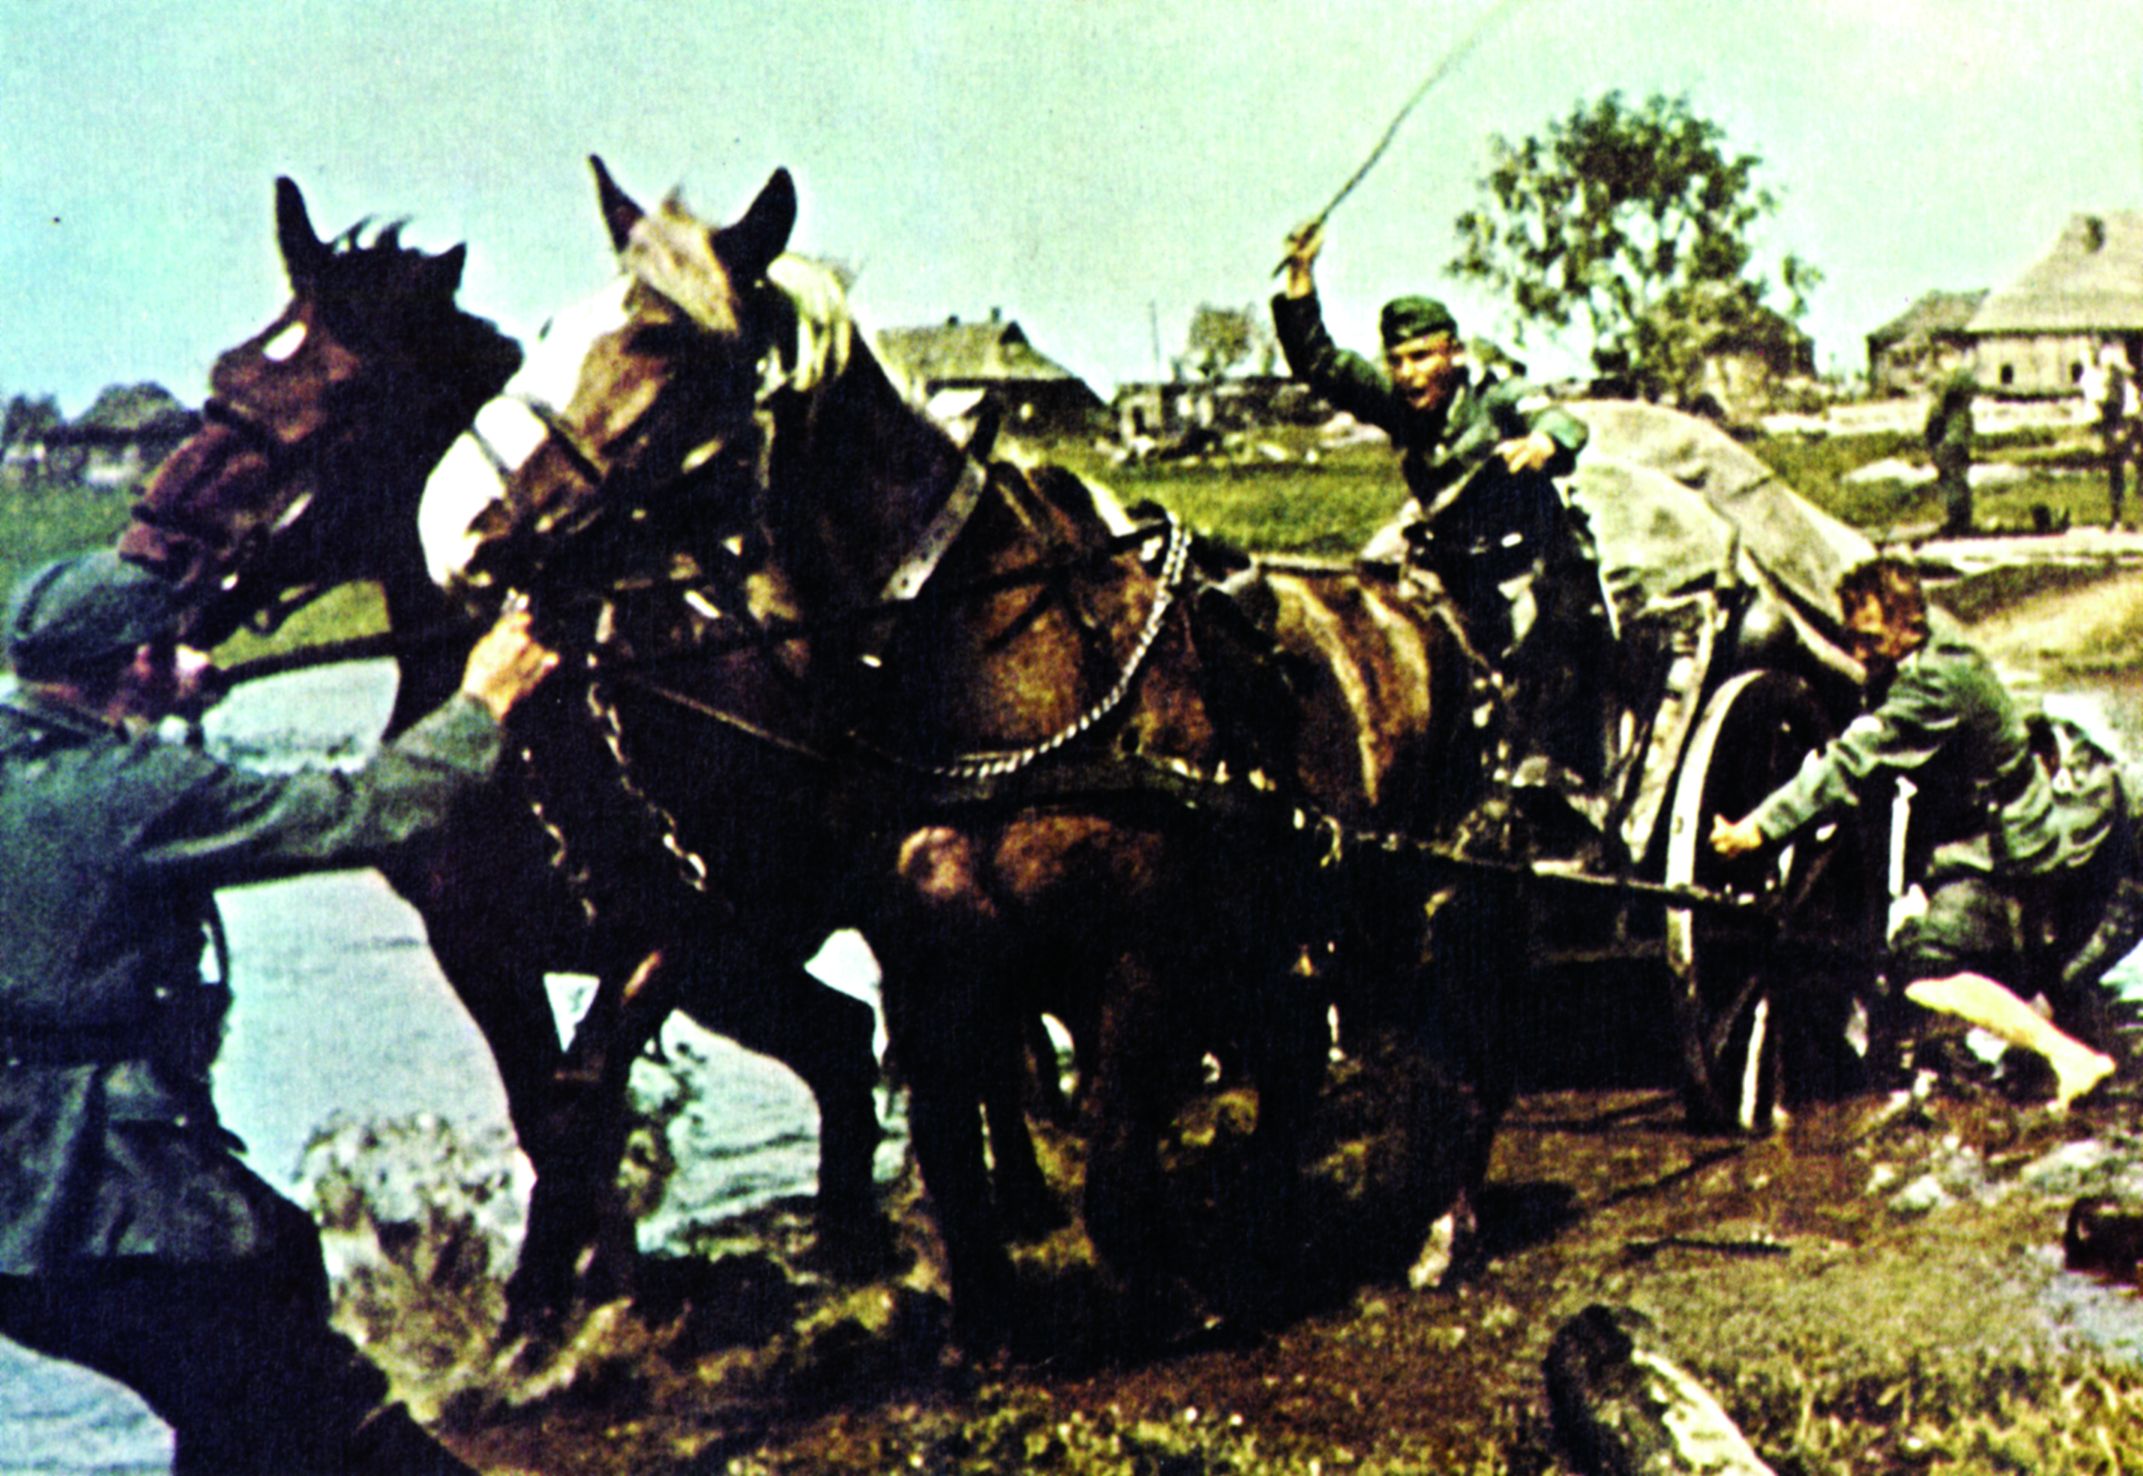 Mired in mud up to its axles, a German supply wagon is caught in the quagmire of a Russian road. Soldiers attempt to push, pull, and exhort the pair of horses drawing the wagon to extricate it from the trap caused by the spring snow thaw and heavy rain. (National Archives)